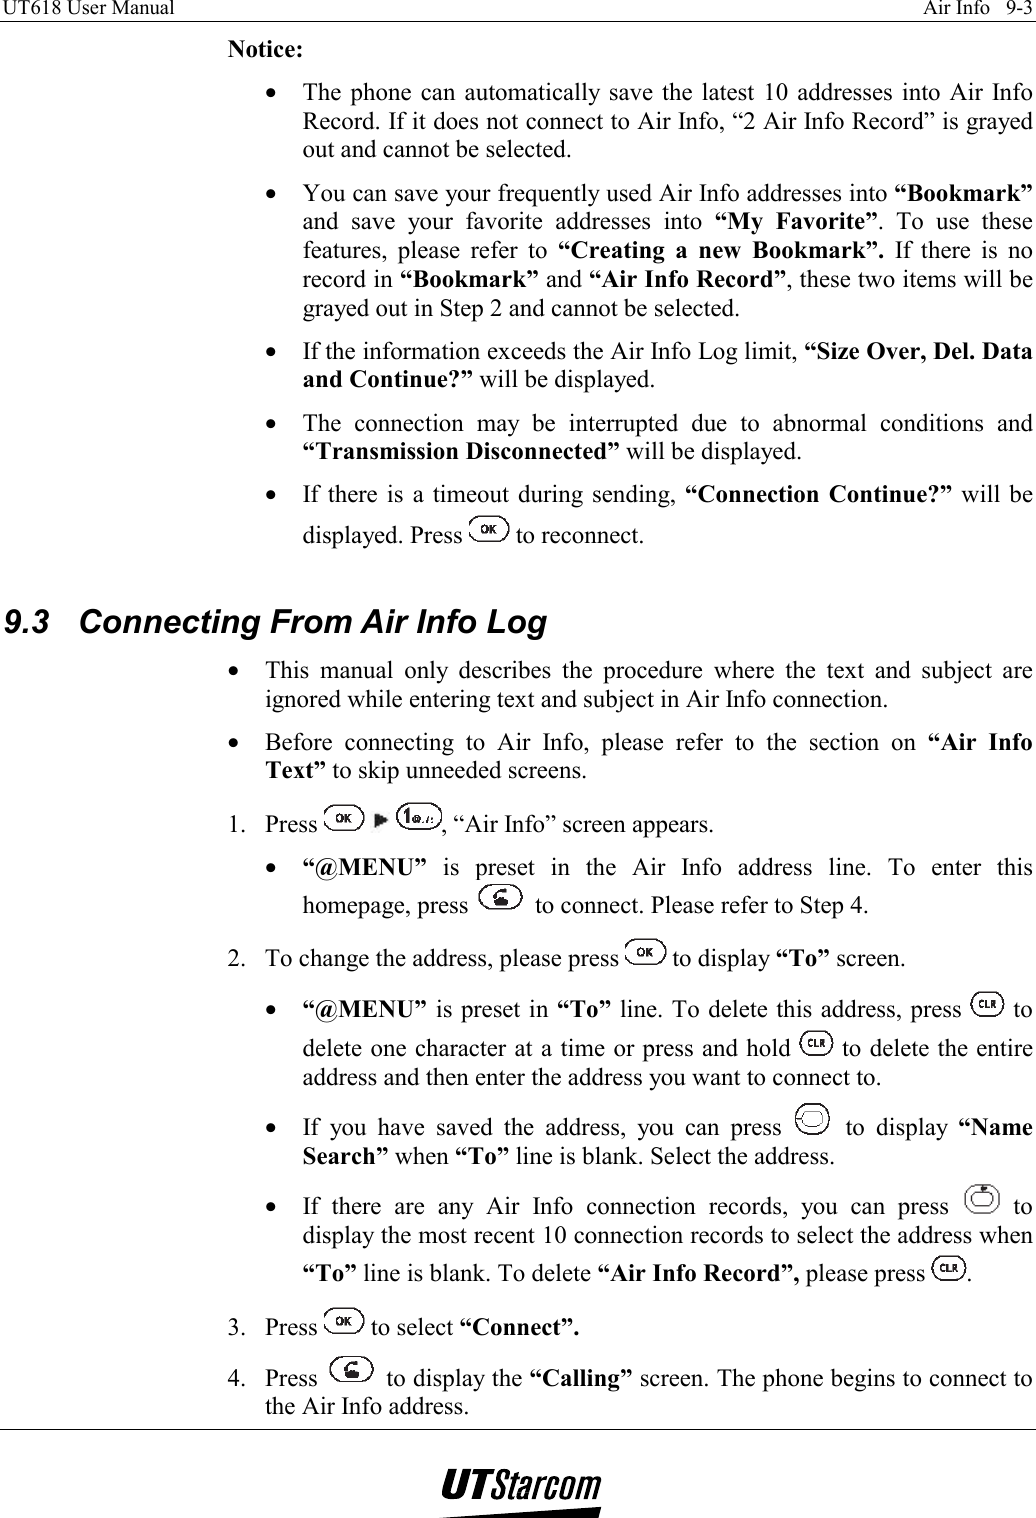 UT618 User Manual    Air Info   9-3   Notice: •  The phone can automatically save the latest 10 addresses into Air Info Record. If it does not connect to Air Info, “2 Air Info Record” is grayed out and cannot be selected. •  You can save your frequently used Air Info addresses into “Bookmark” and save your favorite addresses into “My Favorite”. To use these features, please refer to “Creating a new Bookmark”. If there is no record in “Bookmark” and “Air Info Record”, these two items will be grayed out in Step 2 and cannot be selected. •  If the information exceeds the Air Info Log limit, “Size Over, Del. Data and Continue?” will be displayed. •  The connection may be interrupted due to abnormal conditions and “Transmission Disconnected” will be displayed. •  If there is a timeout during sending, “Connection Continue?” will be displayed. Press   to reconnect.  9.3  Connecting From Air Info Log •  This manual only describes the procedure where the text and subject are ignored while entering text and subject in Air Info connection. •  Before connecting to Air Info, please refer to the section on “Air Info Text” to skip unneeded screens. 1. Press      , “Air Info” screen appears. •  “@MENU” is preset in the Air Info address line. To enter this homepage, press   to connect. Please refer to Step 4. 2.  To change the address, please press   to display “To” screen. •  “@MENU” is preset in “To” line. To delete this address, press   to delete one character at a time or press and hold   to delete the entire address and then enter the address you want to connect to.  •  If you have saved the address, you can press   to display “Name Search” when “To” line is blank. Select the address.  •  If there are any Air Info connection records, you can press   to display the most recent 10 connection records to select the address when “To” line is blank. To delete “Air Info Record”, please press  . 3. Press   to select “Connect”. 4. Press   to display the “Calling” screen. The phone begins to connect to the Air Info address. 